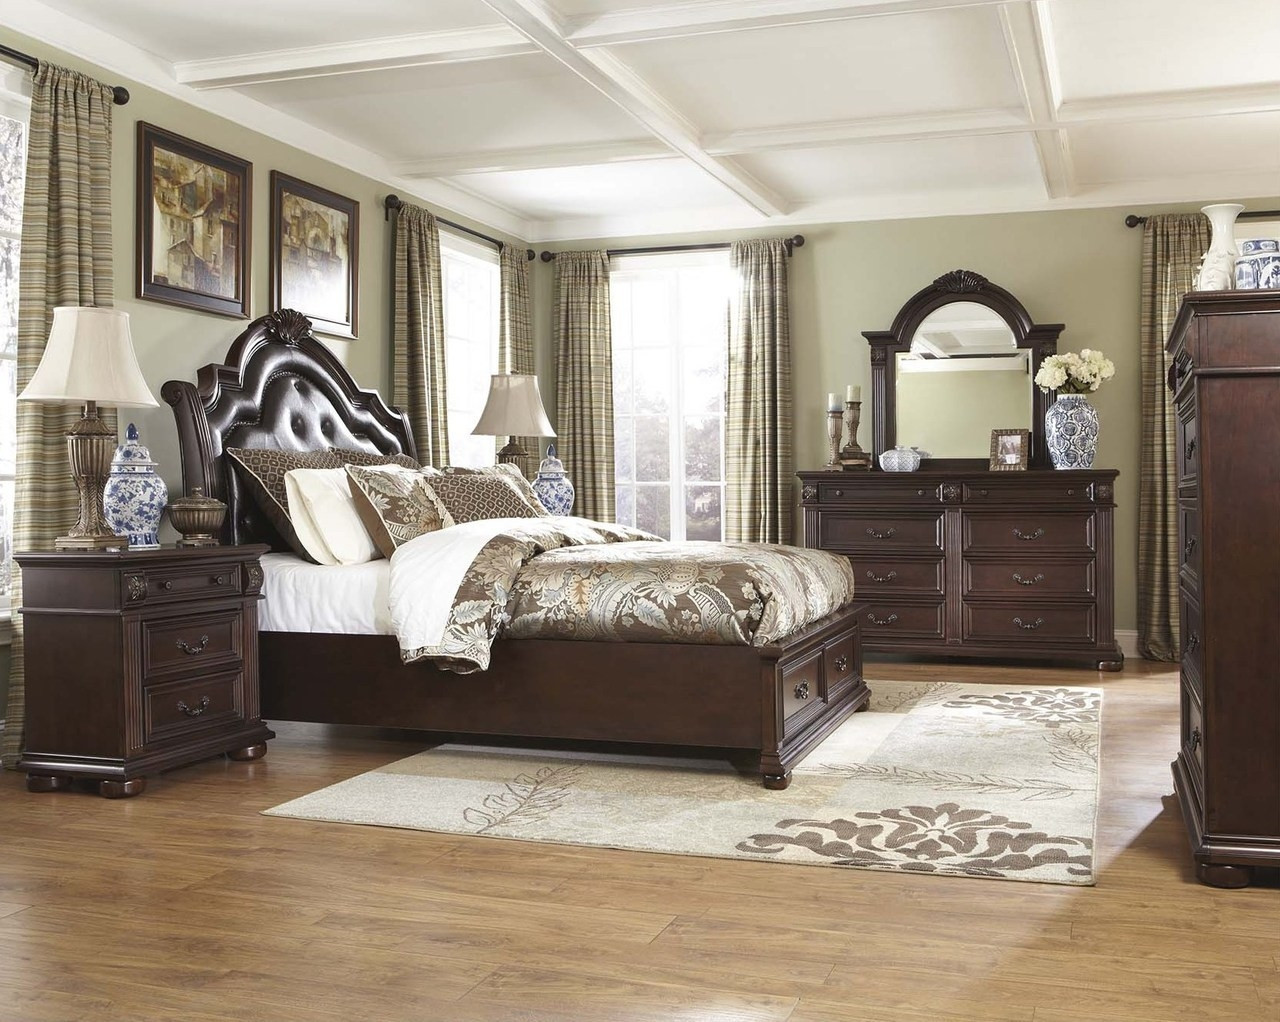 Master Bedroom Sets King
 Bedroom Give Your Bedroom Cozy Nuance With Master Bedroom